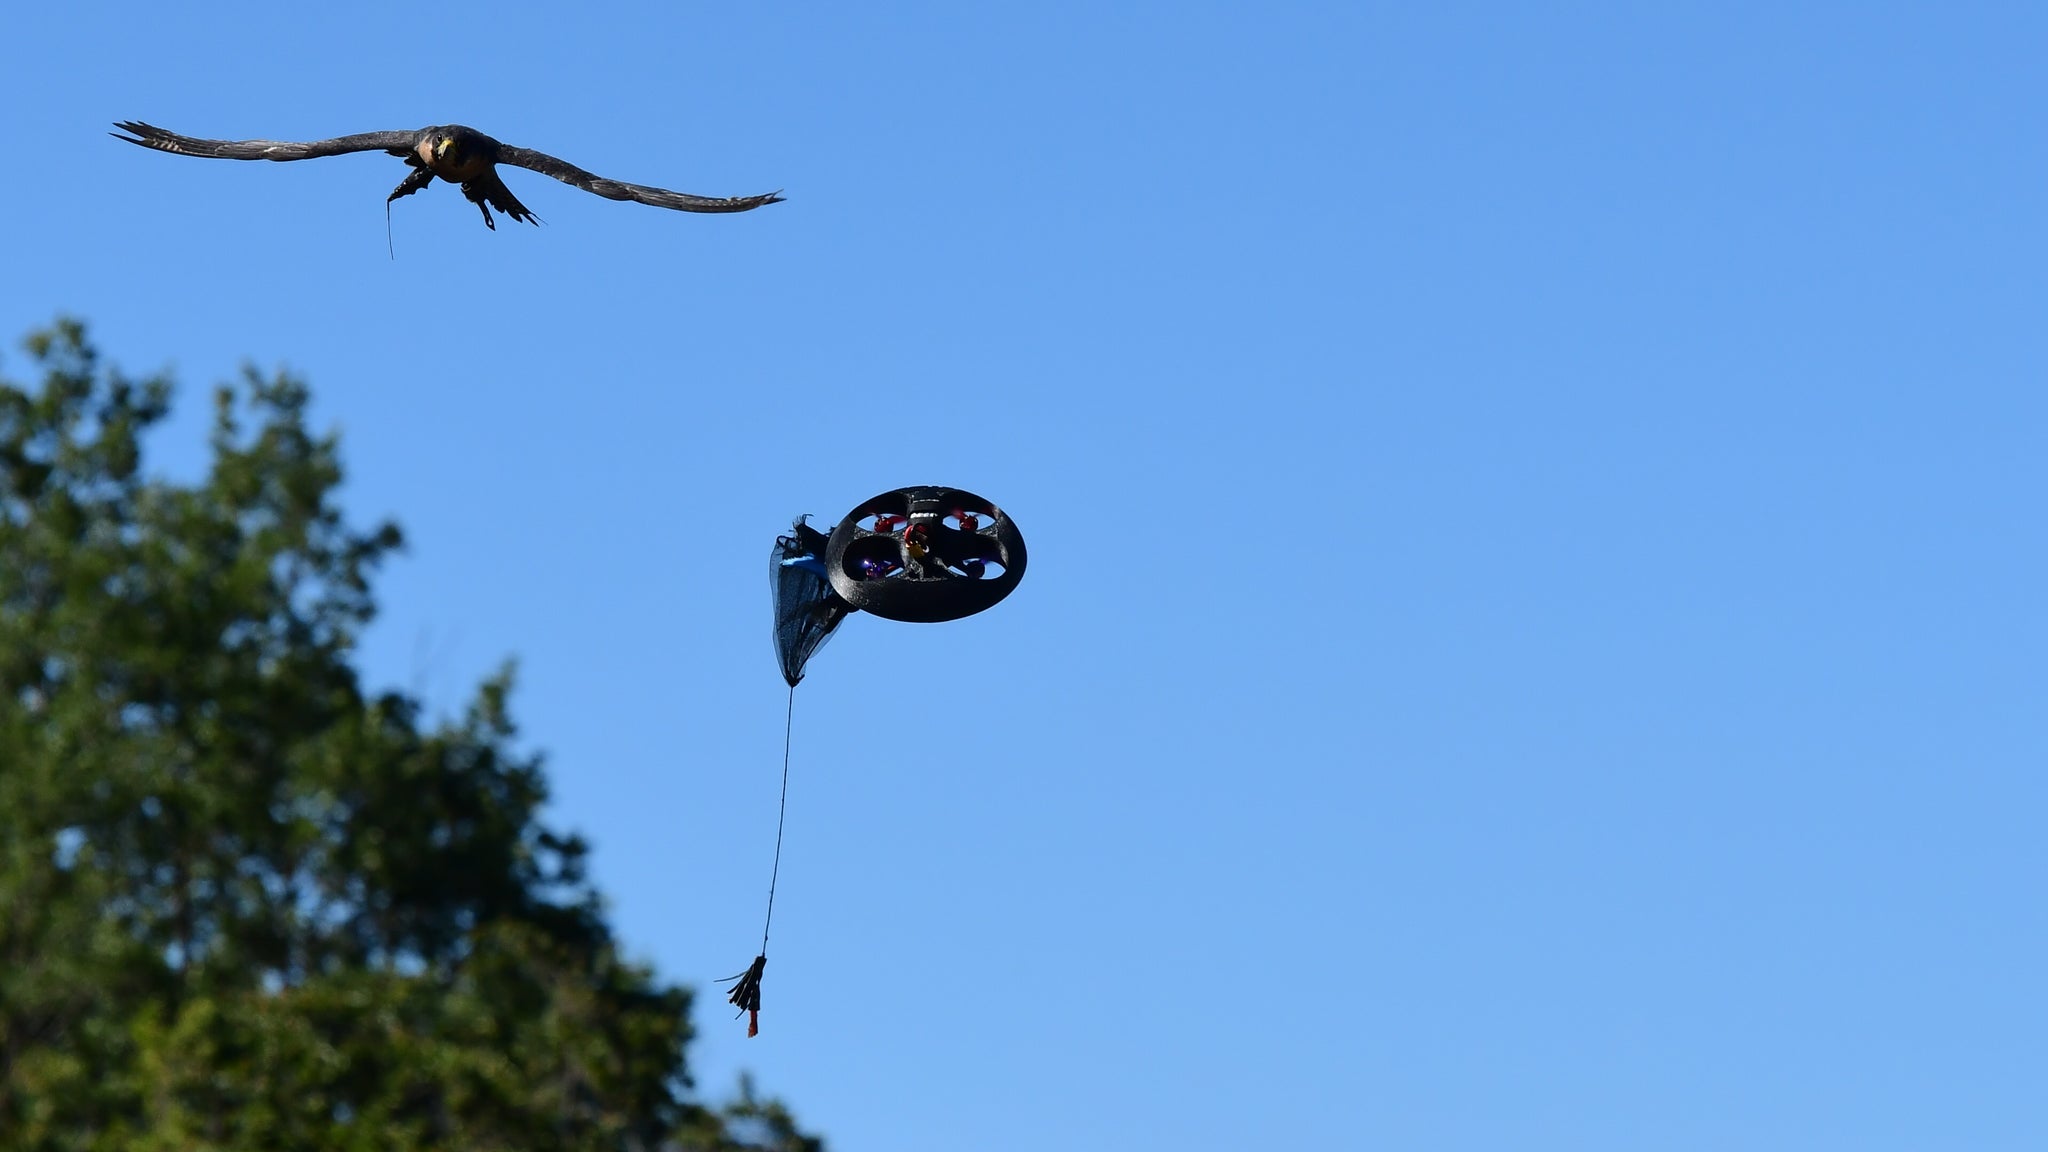 Modern Technologies Applied to Falconry & Reintroduction: the first high-tech training program for birds of prey